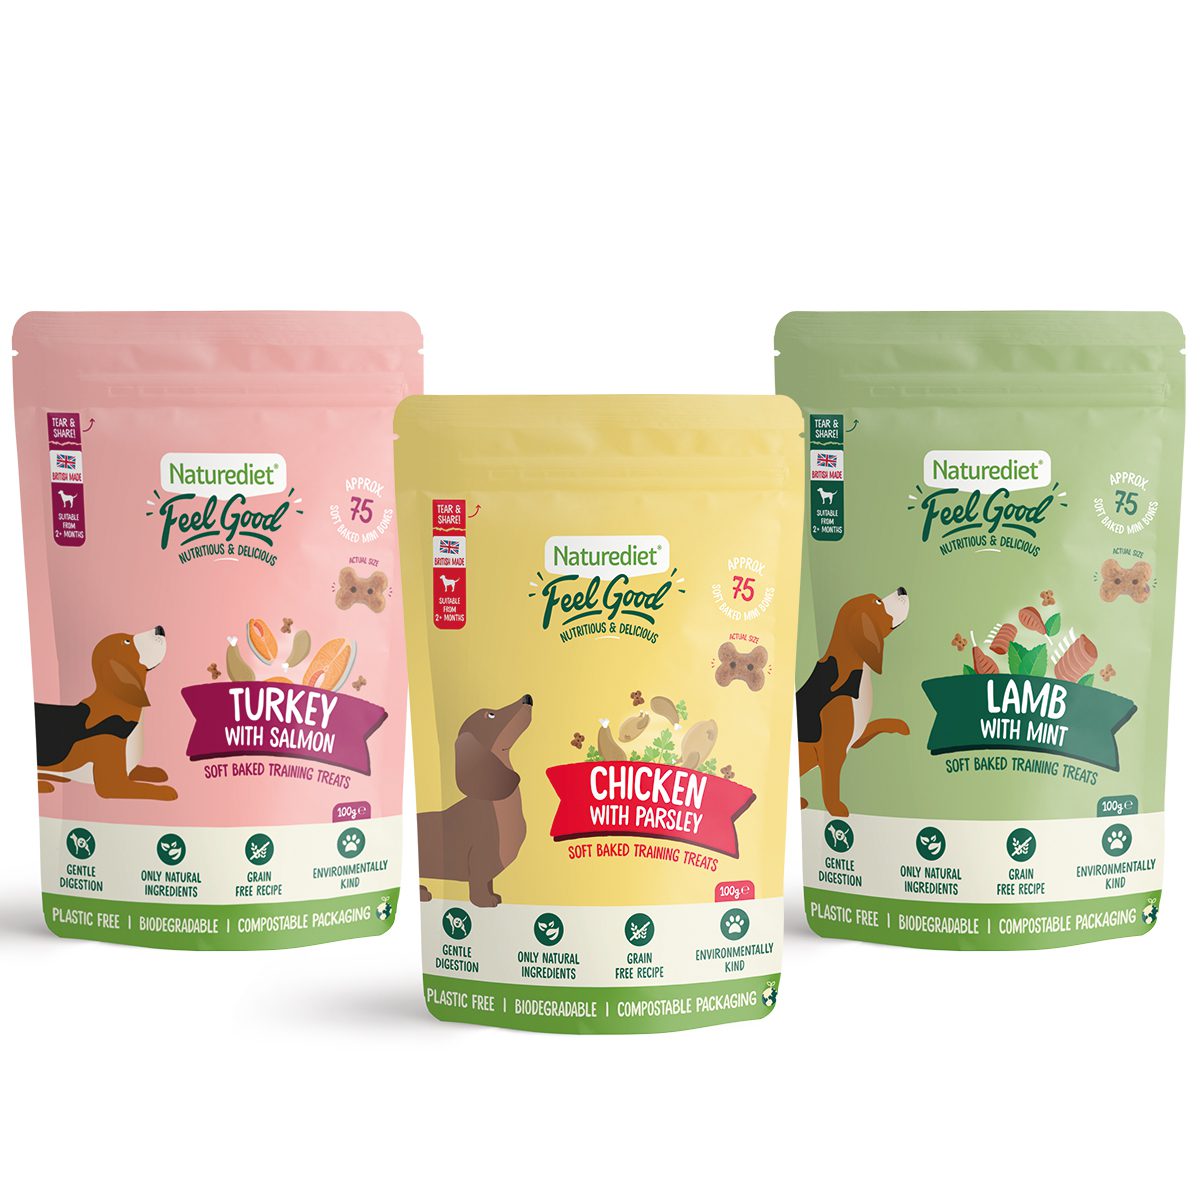 Feel Good Soft Baked Training Treats Introductory Pack